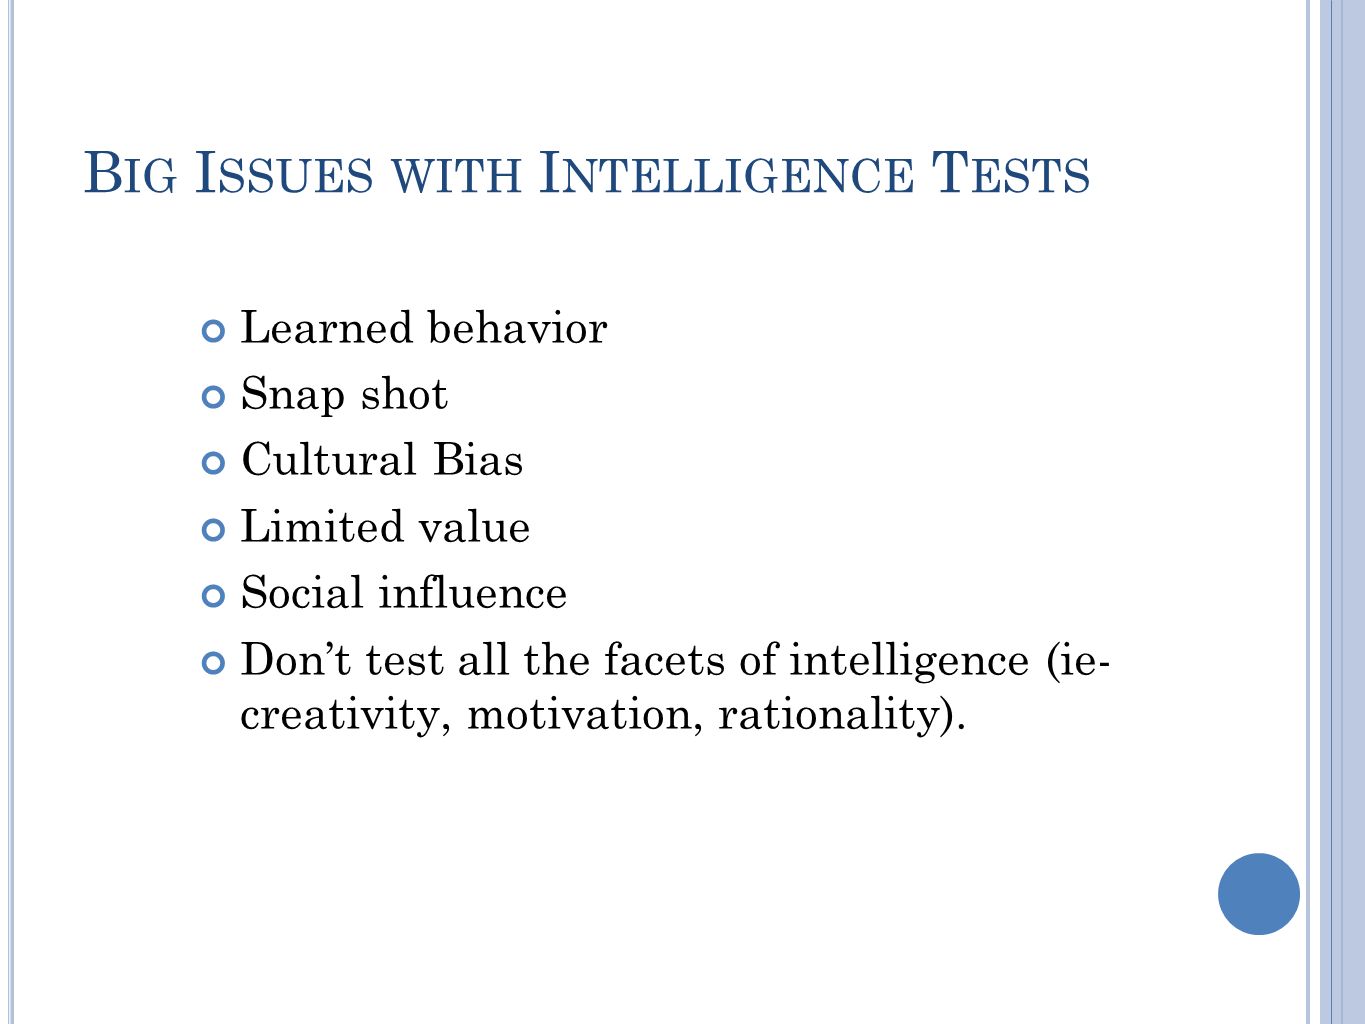 B IG I SSUES WITH I NTELLIGENCE T ESTS Learned behavior Snap shot Cultural Bias Limited value Social influence Don’t test all the facets of intelligence (ie- creativity, motivation, rationality).